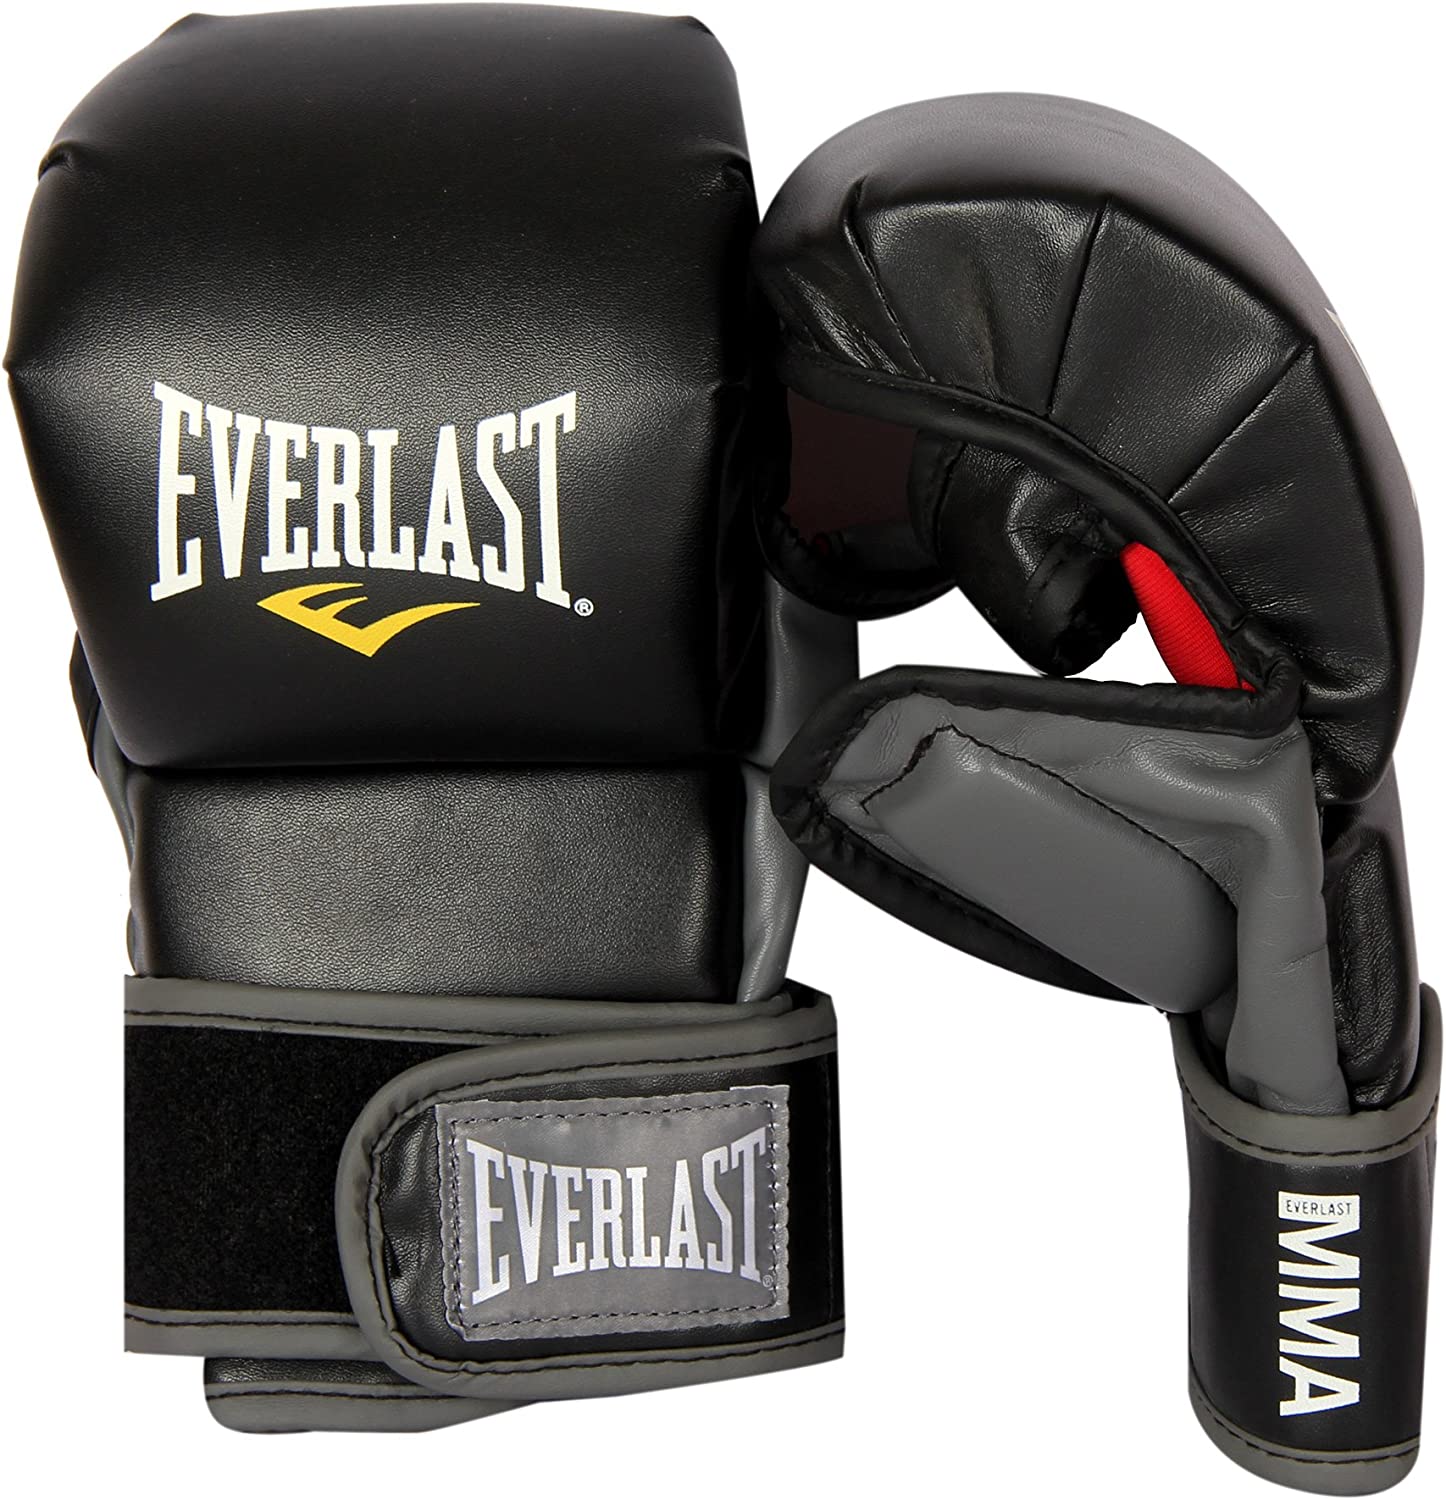 Premium karate sparring gloves trusted by experts. These gloves excel in comfort, durability, and functionality. Designed by Everlast specifically for karate practitioners, they provide the ultimate support and performance for intense sparring sessions.